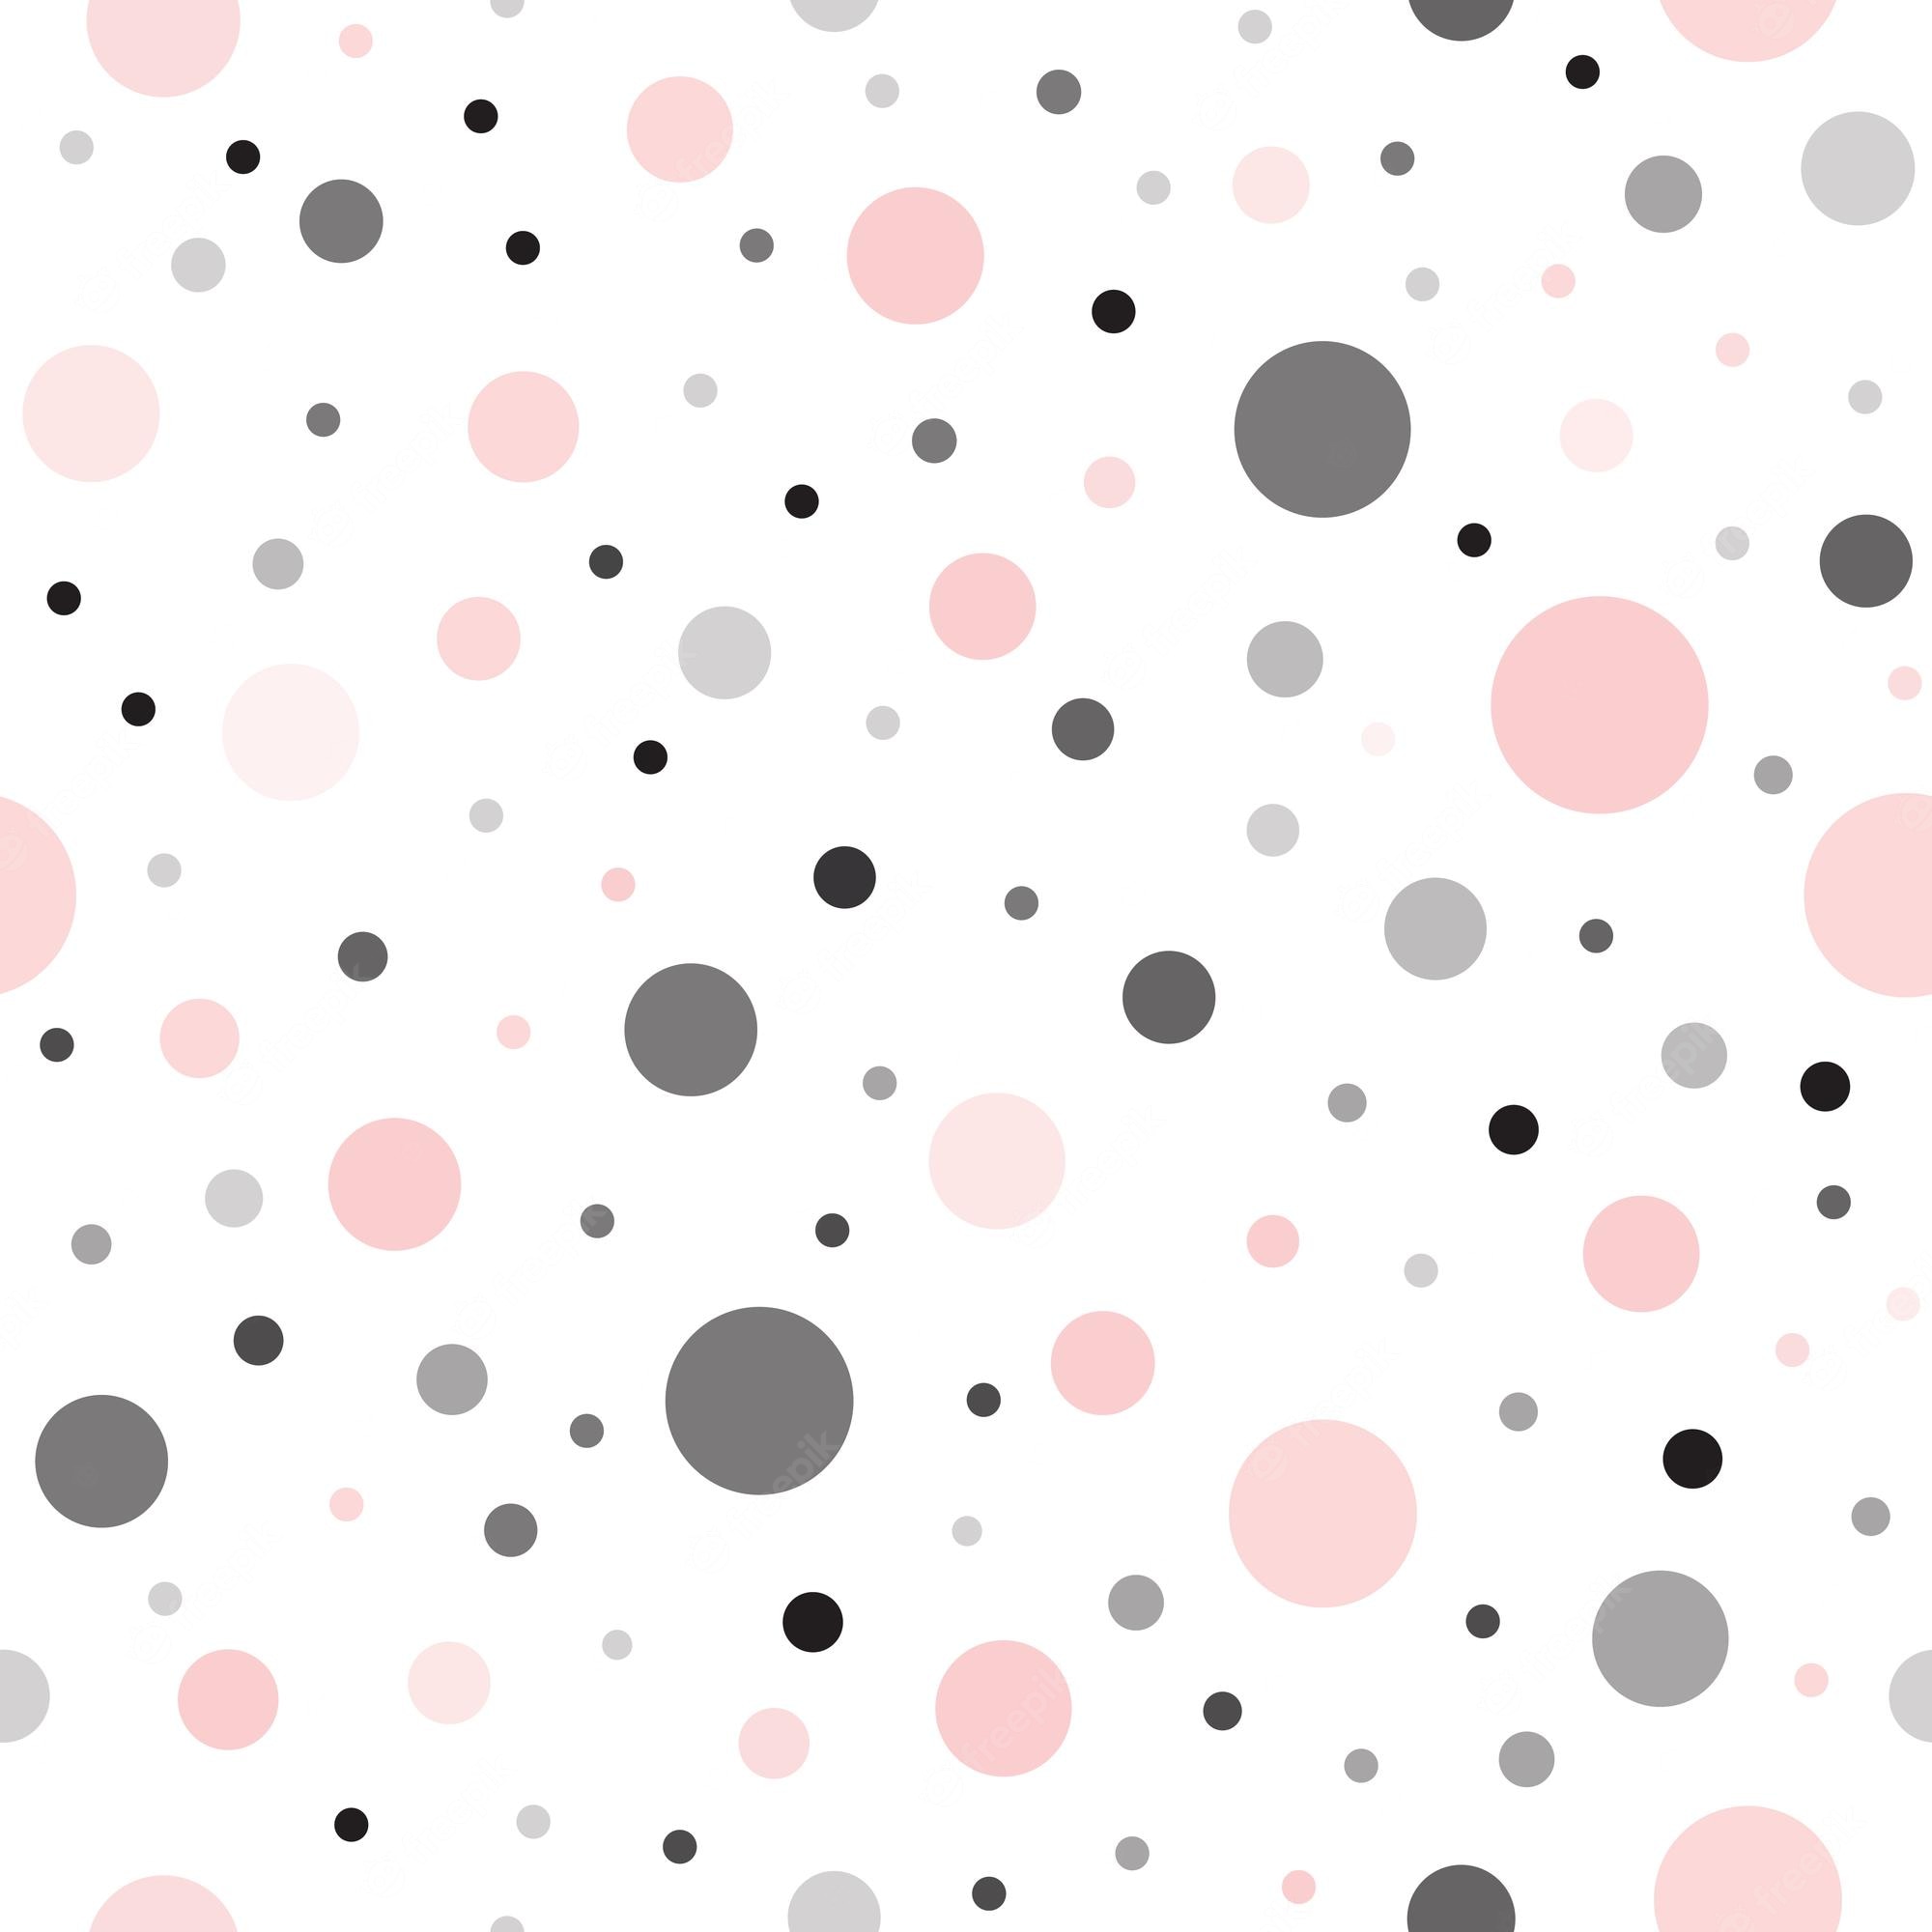 Premium Vector. Classic dotted seamless pink black and white pattern delicate polka dot geometric ornate vector illustration for wallpaper wrap fabric textile cloth or package design baby shower background